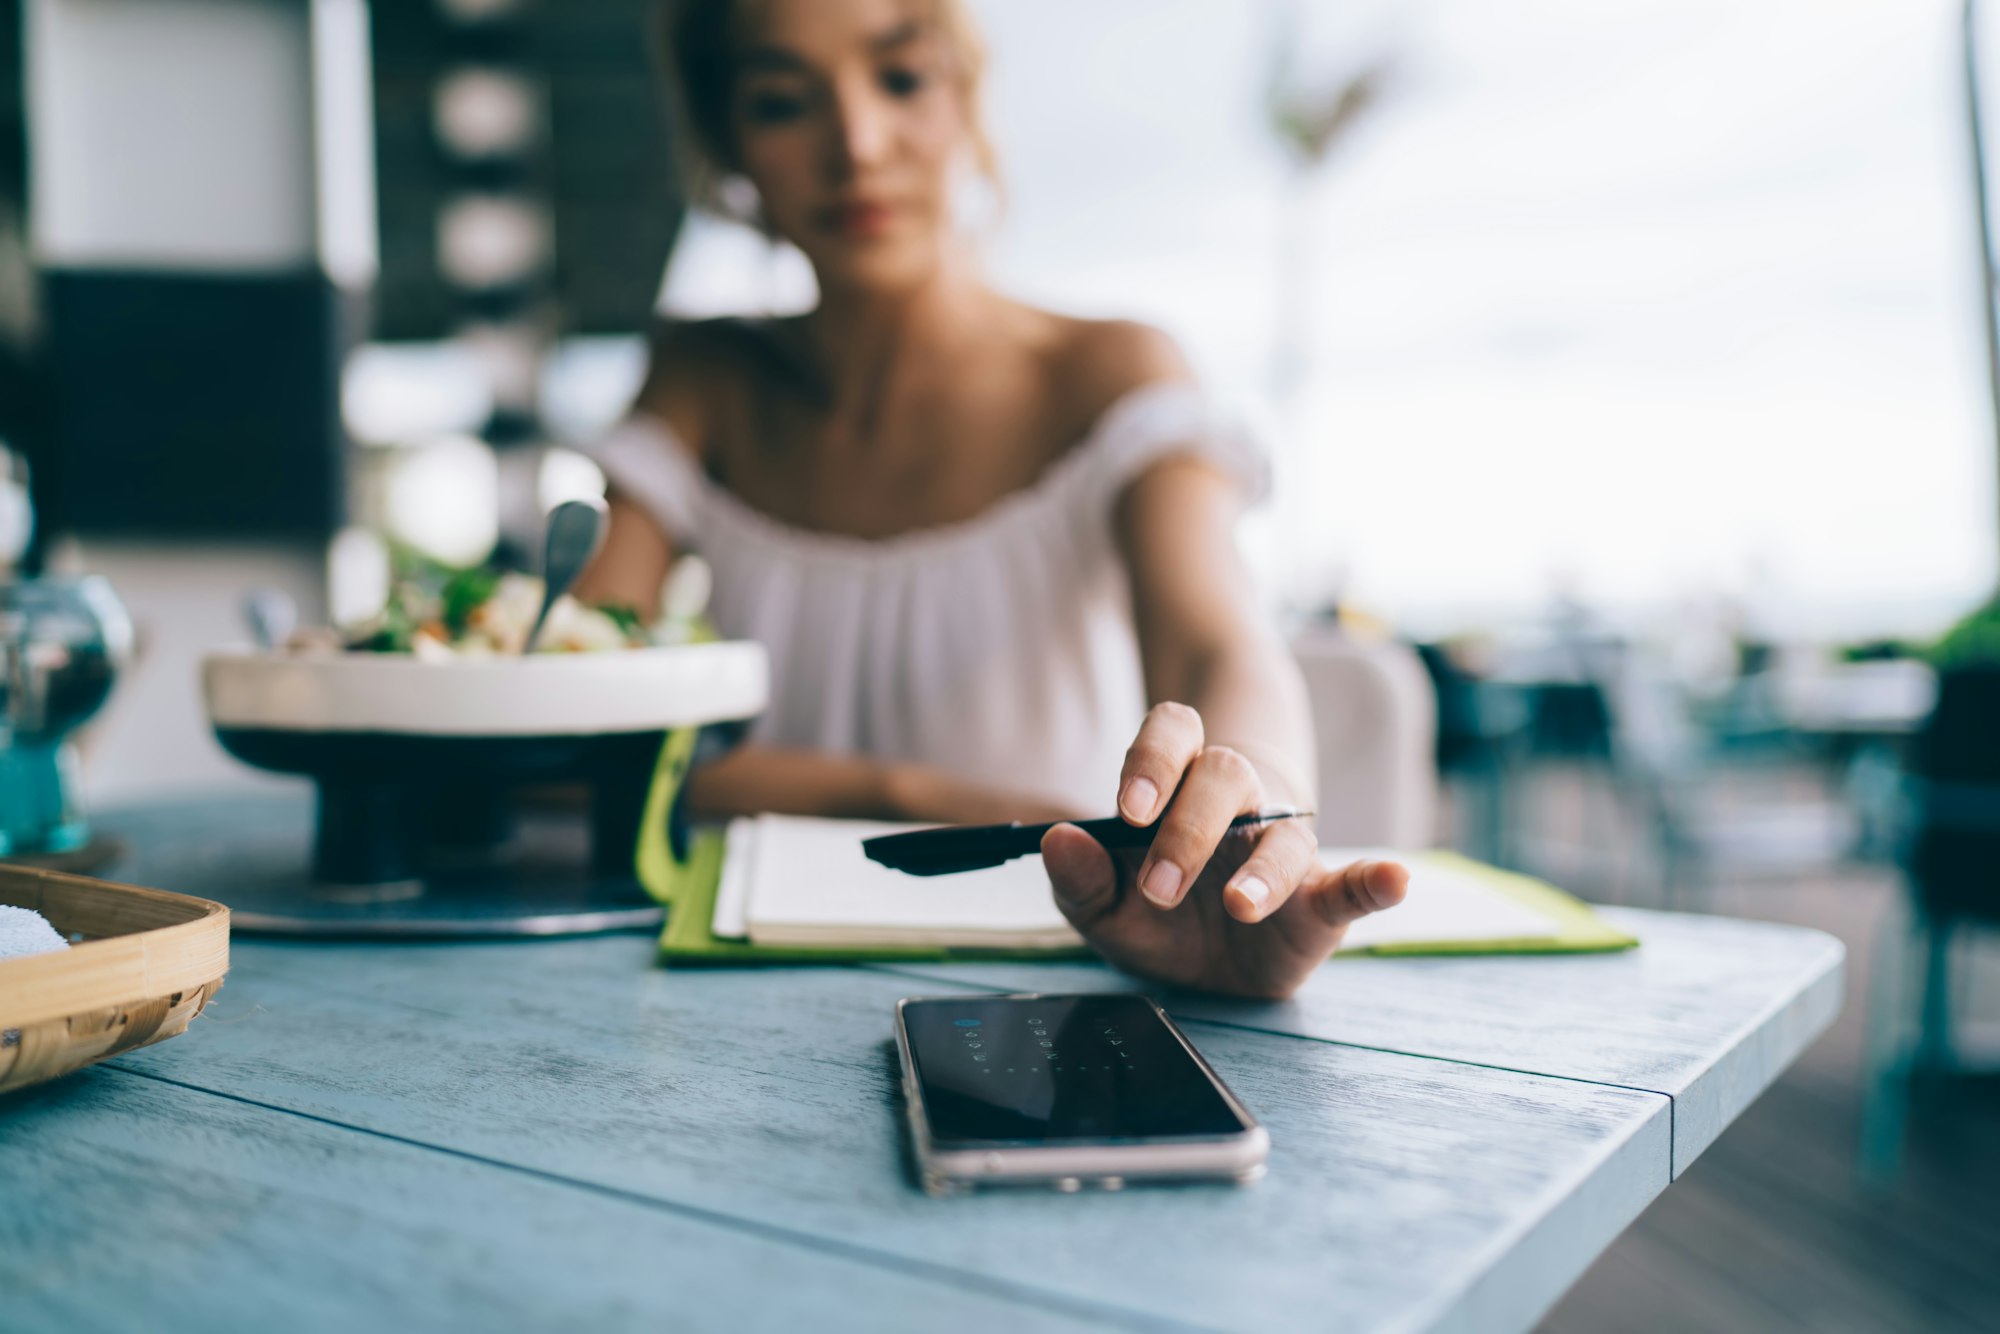 Blurred woman using smartphone in cafe having lunch